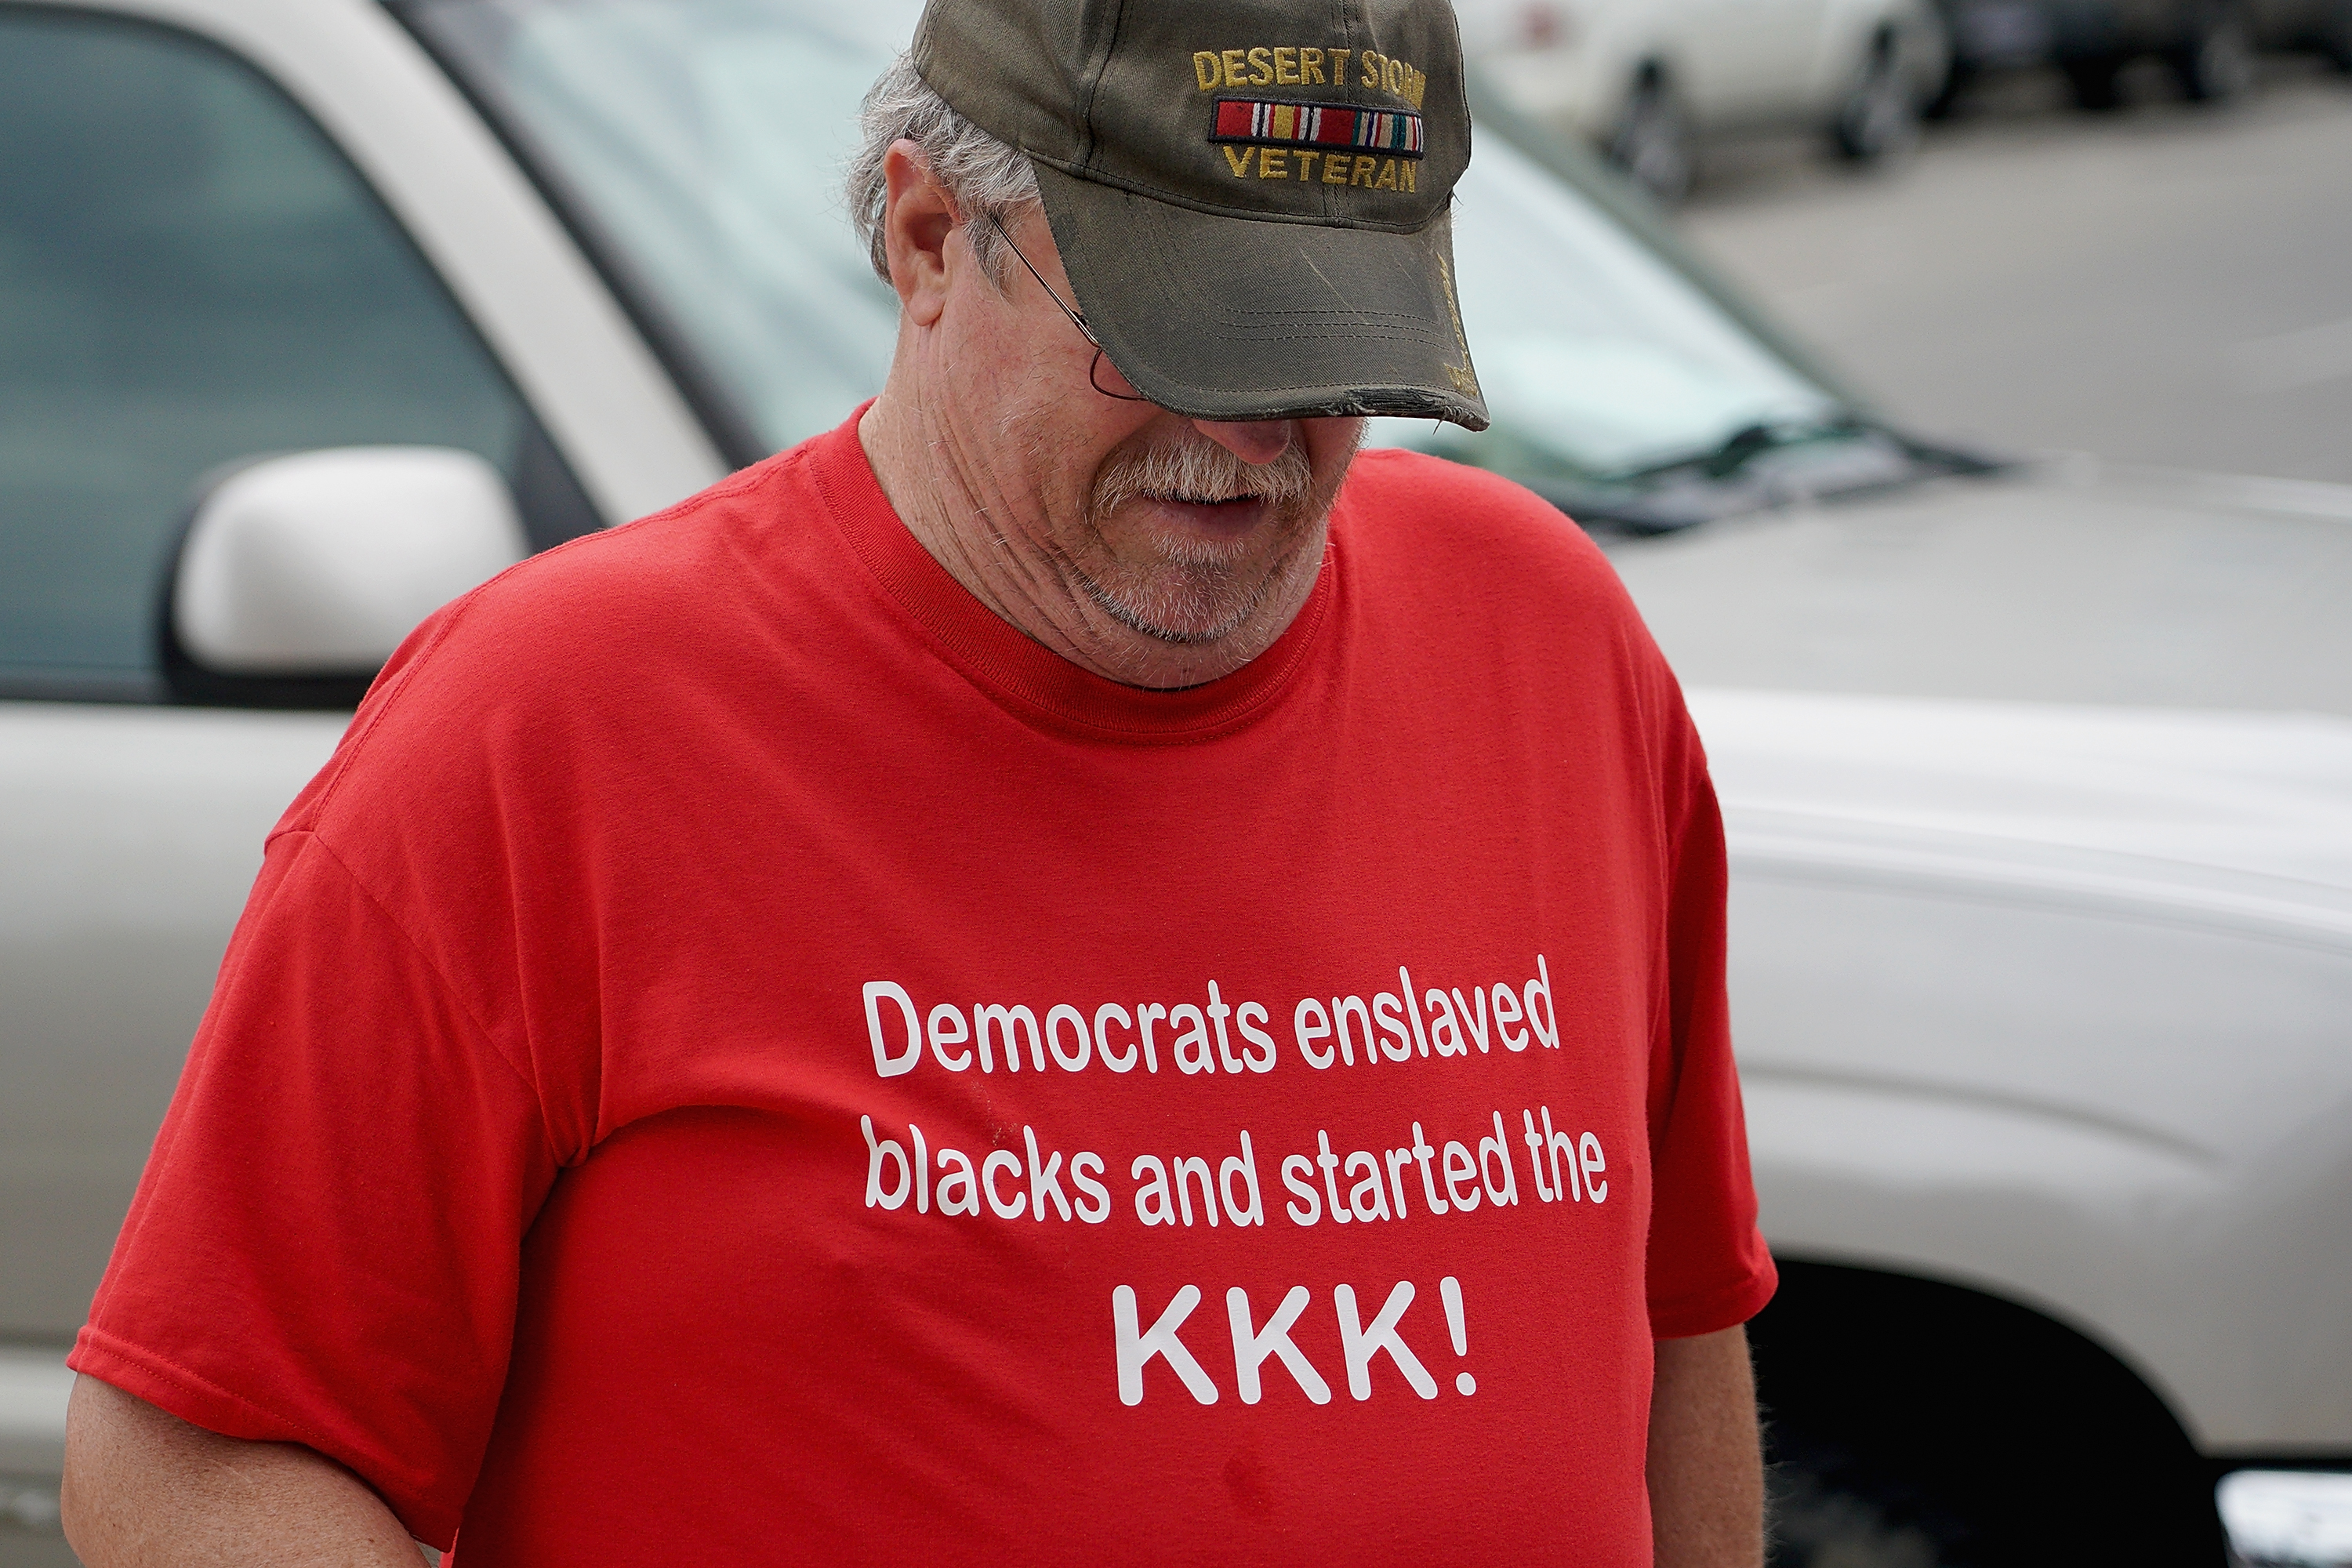 TULSA, OK - JUNE 20: A Pro-conservative supporter displays a message on his shirt prior to a campaign rally for President Donald Trump at the BOK Center on June 20, 2020 in Tulsa, Oklahoma. Trump is scheduled to hold his first political rally since the start of the coronavirus pandemic at the BOK Center on Saturday while infection rates in the state of Oklahoma continue to rise. (Photo by Michael B. Thomas/Getty Images)